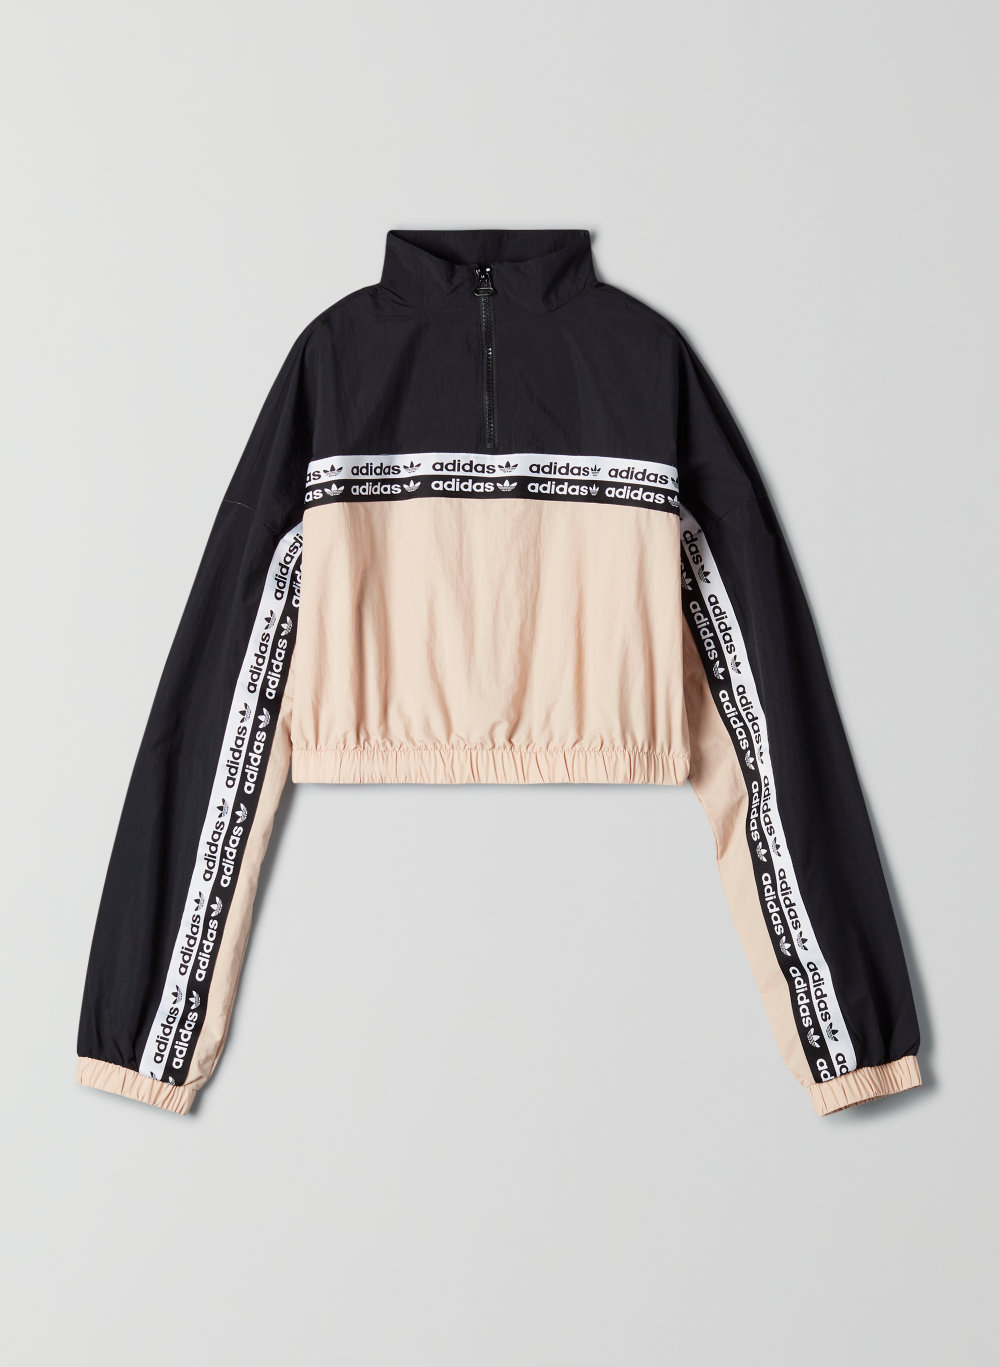 adidas cropped sweater